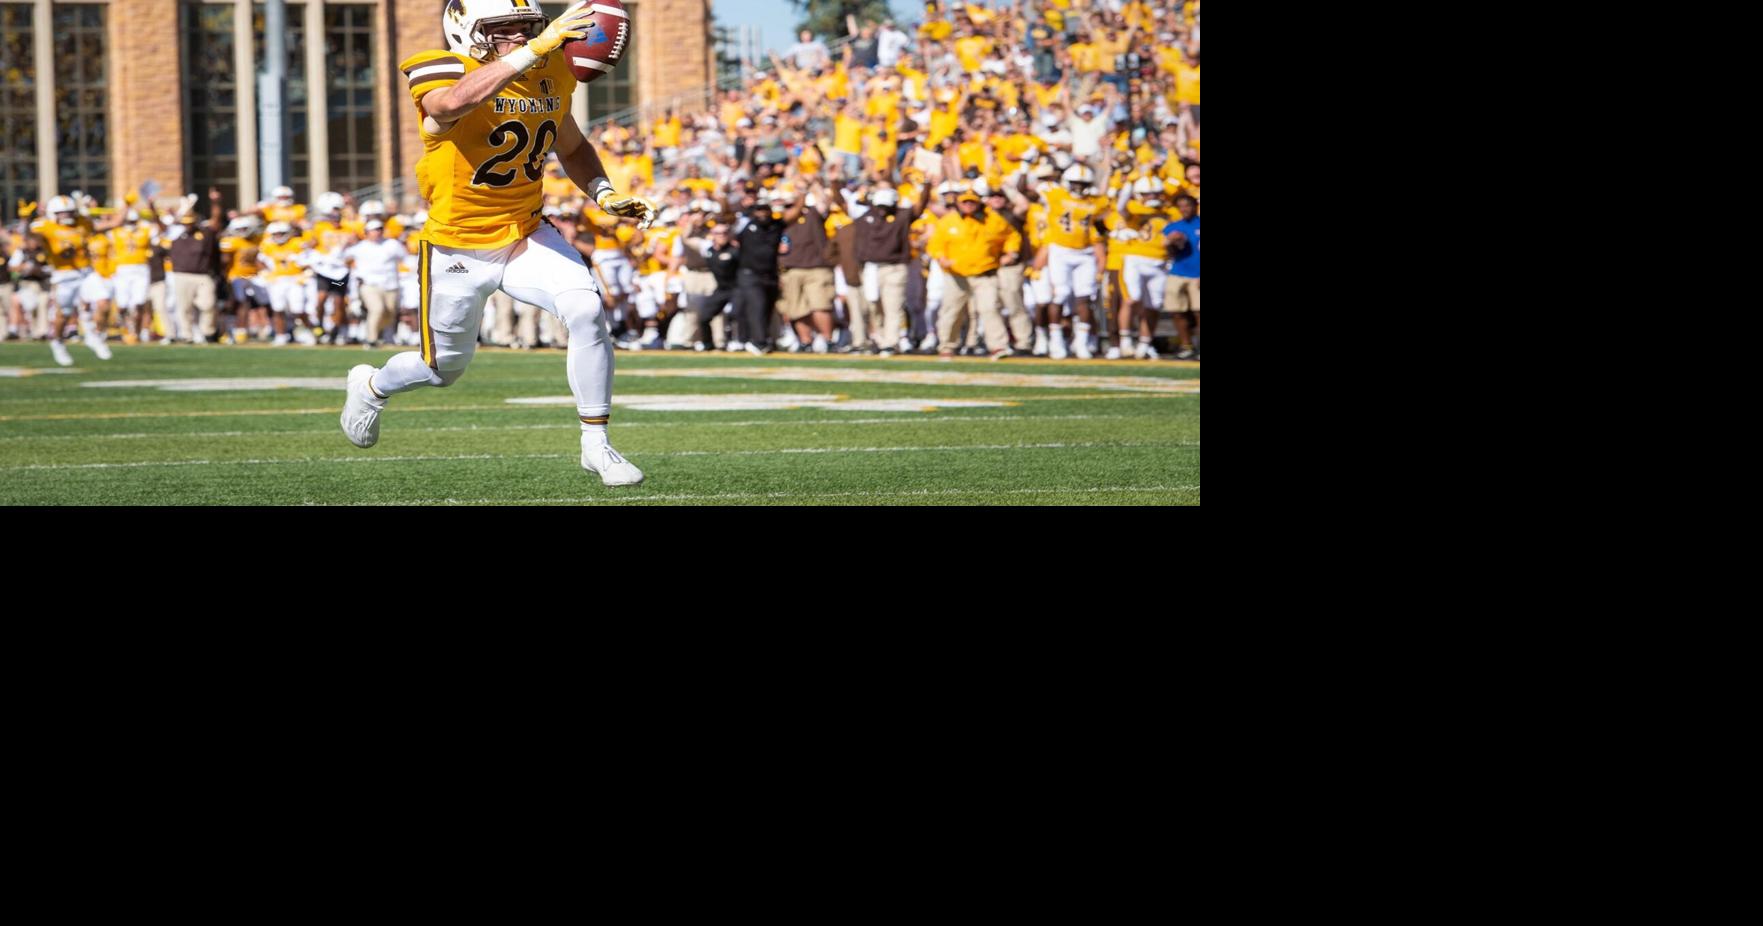 Wyoming Wins a Thriller, 40-37, in Double Overtime Over Tulsa